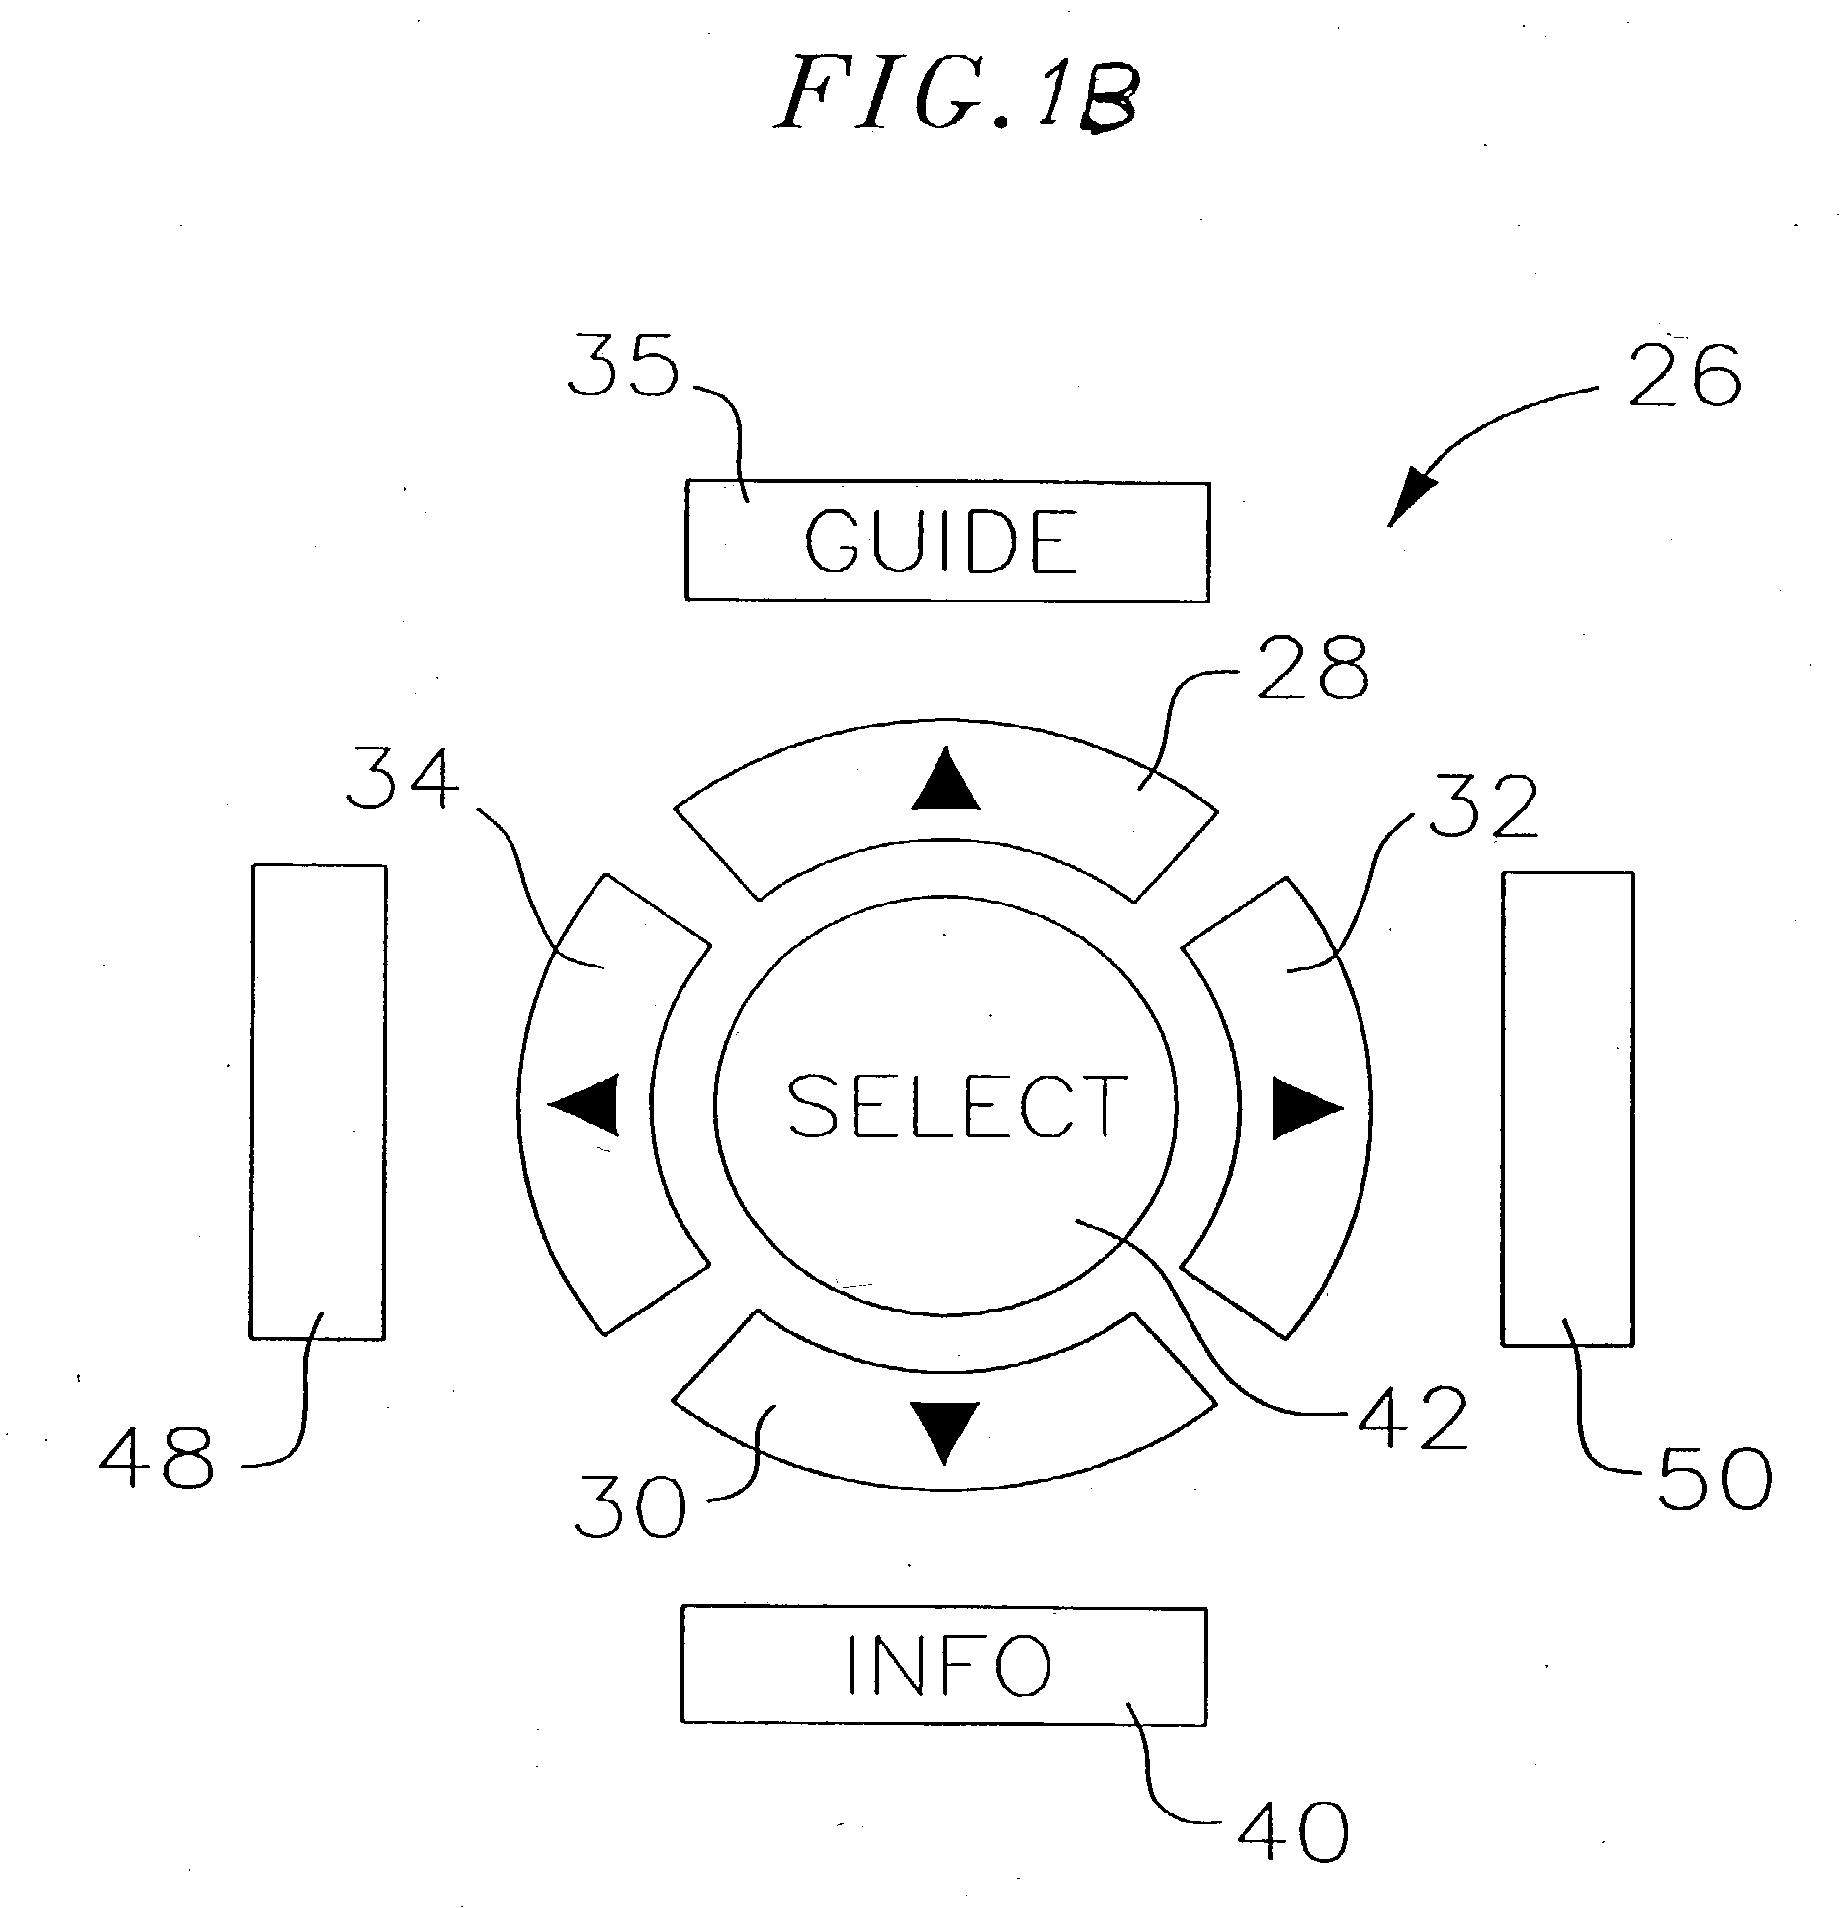 Systems and methods for capturing video related to products